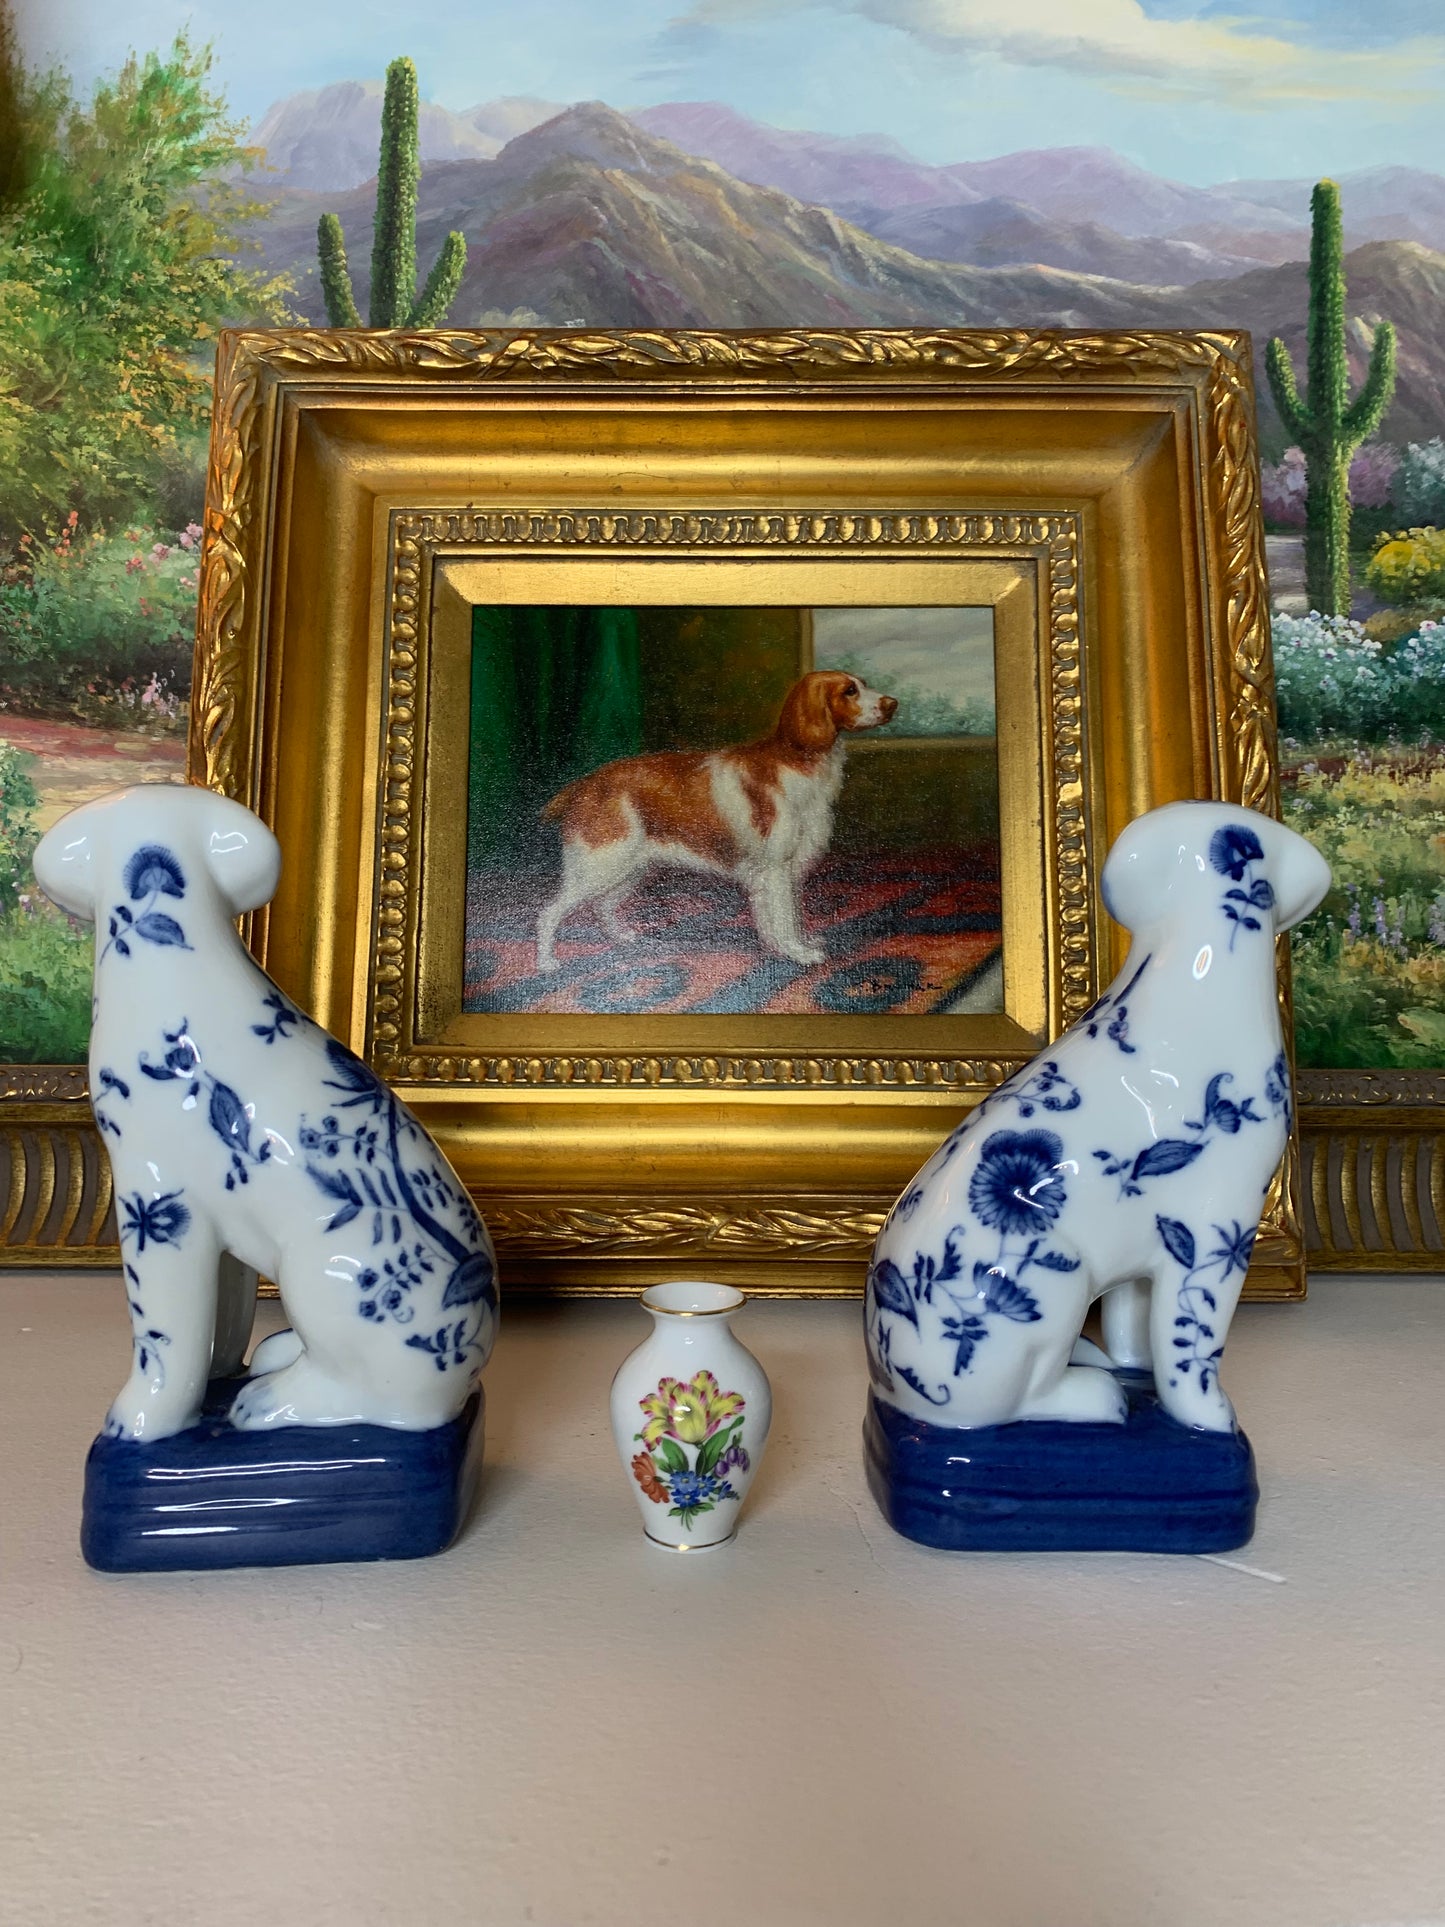 Beautiful blue and white floral Wong Lee dogs pair (2) - Beautiful condition!